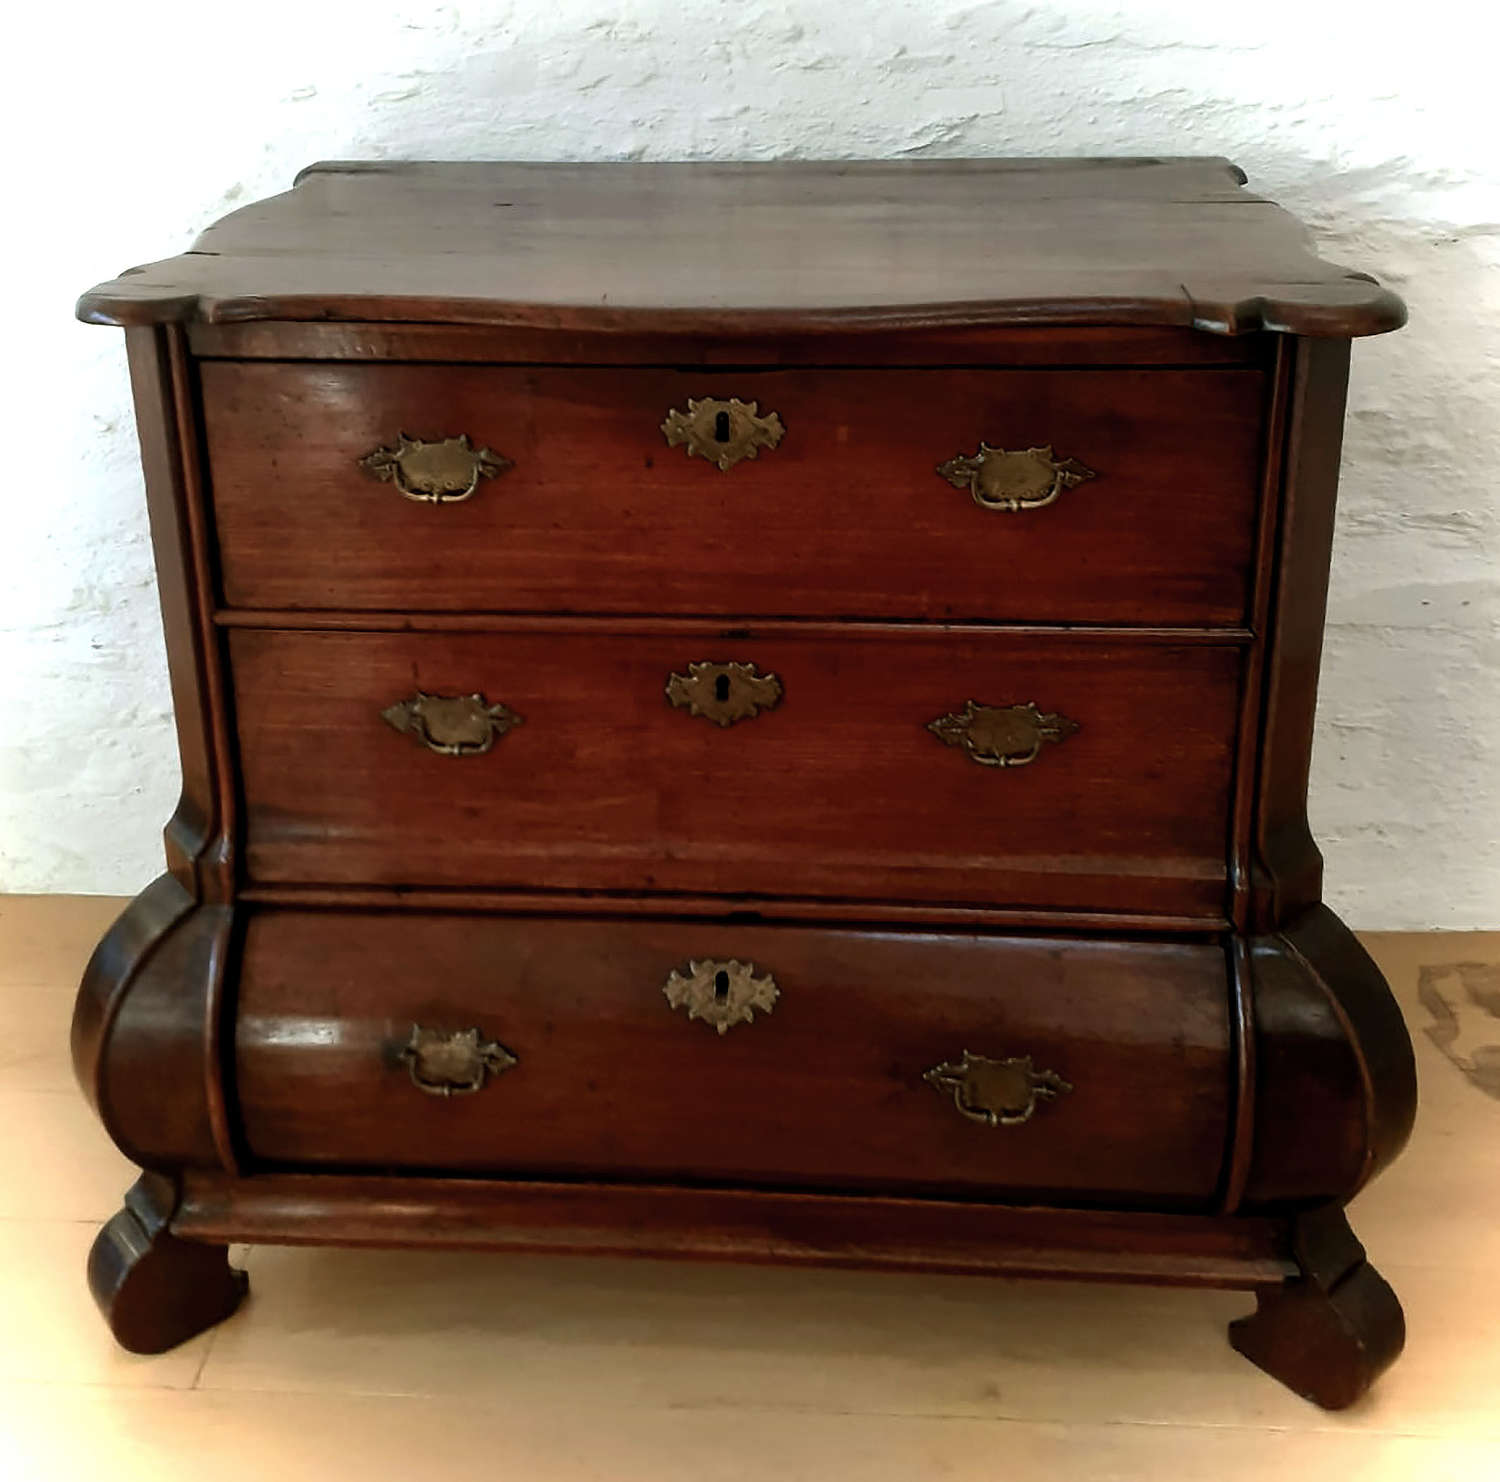 Late 18th/Early 19th Century Dutch commode